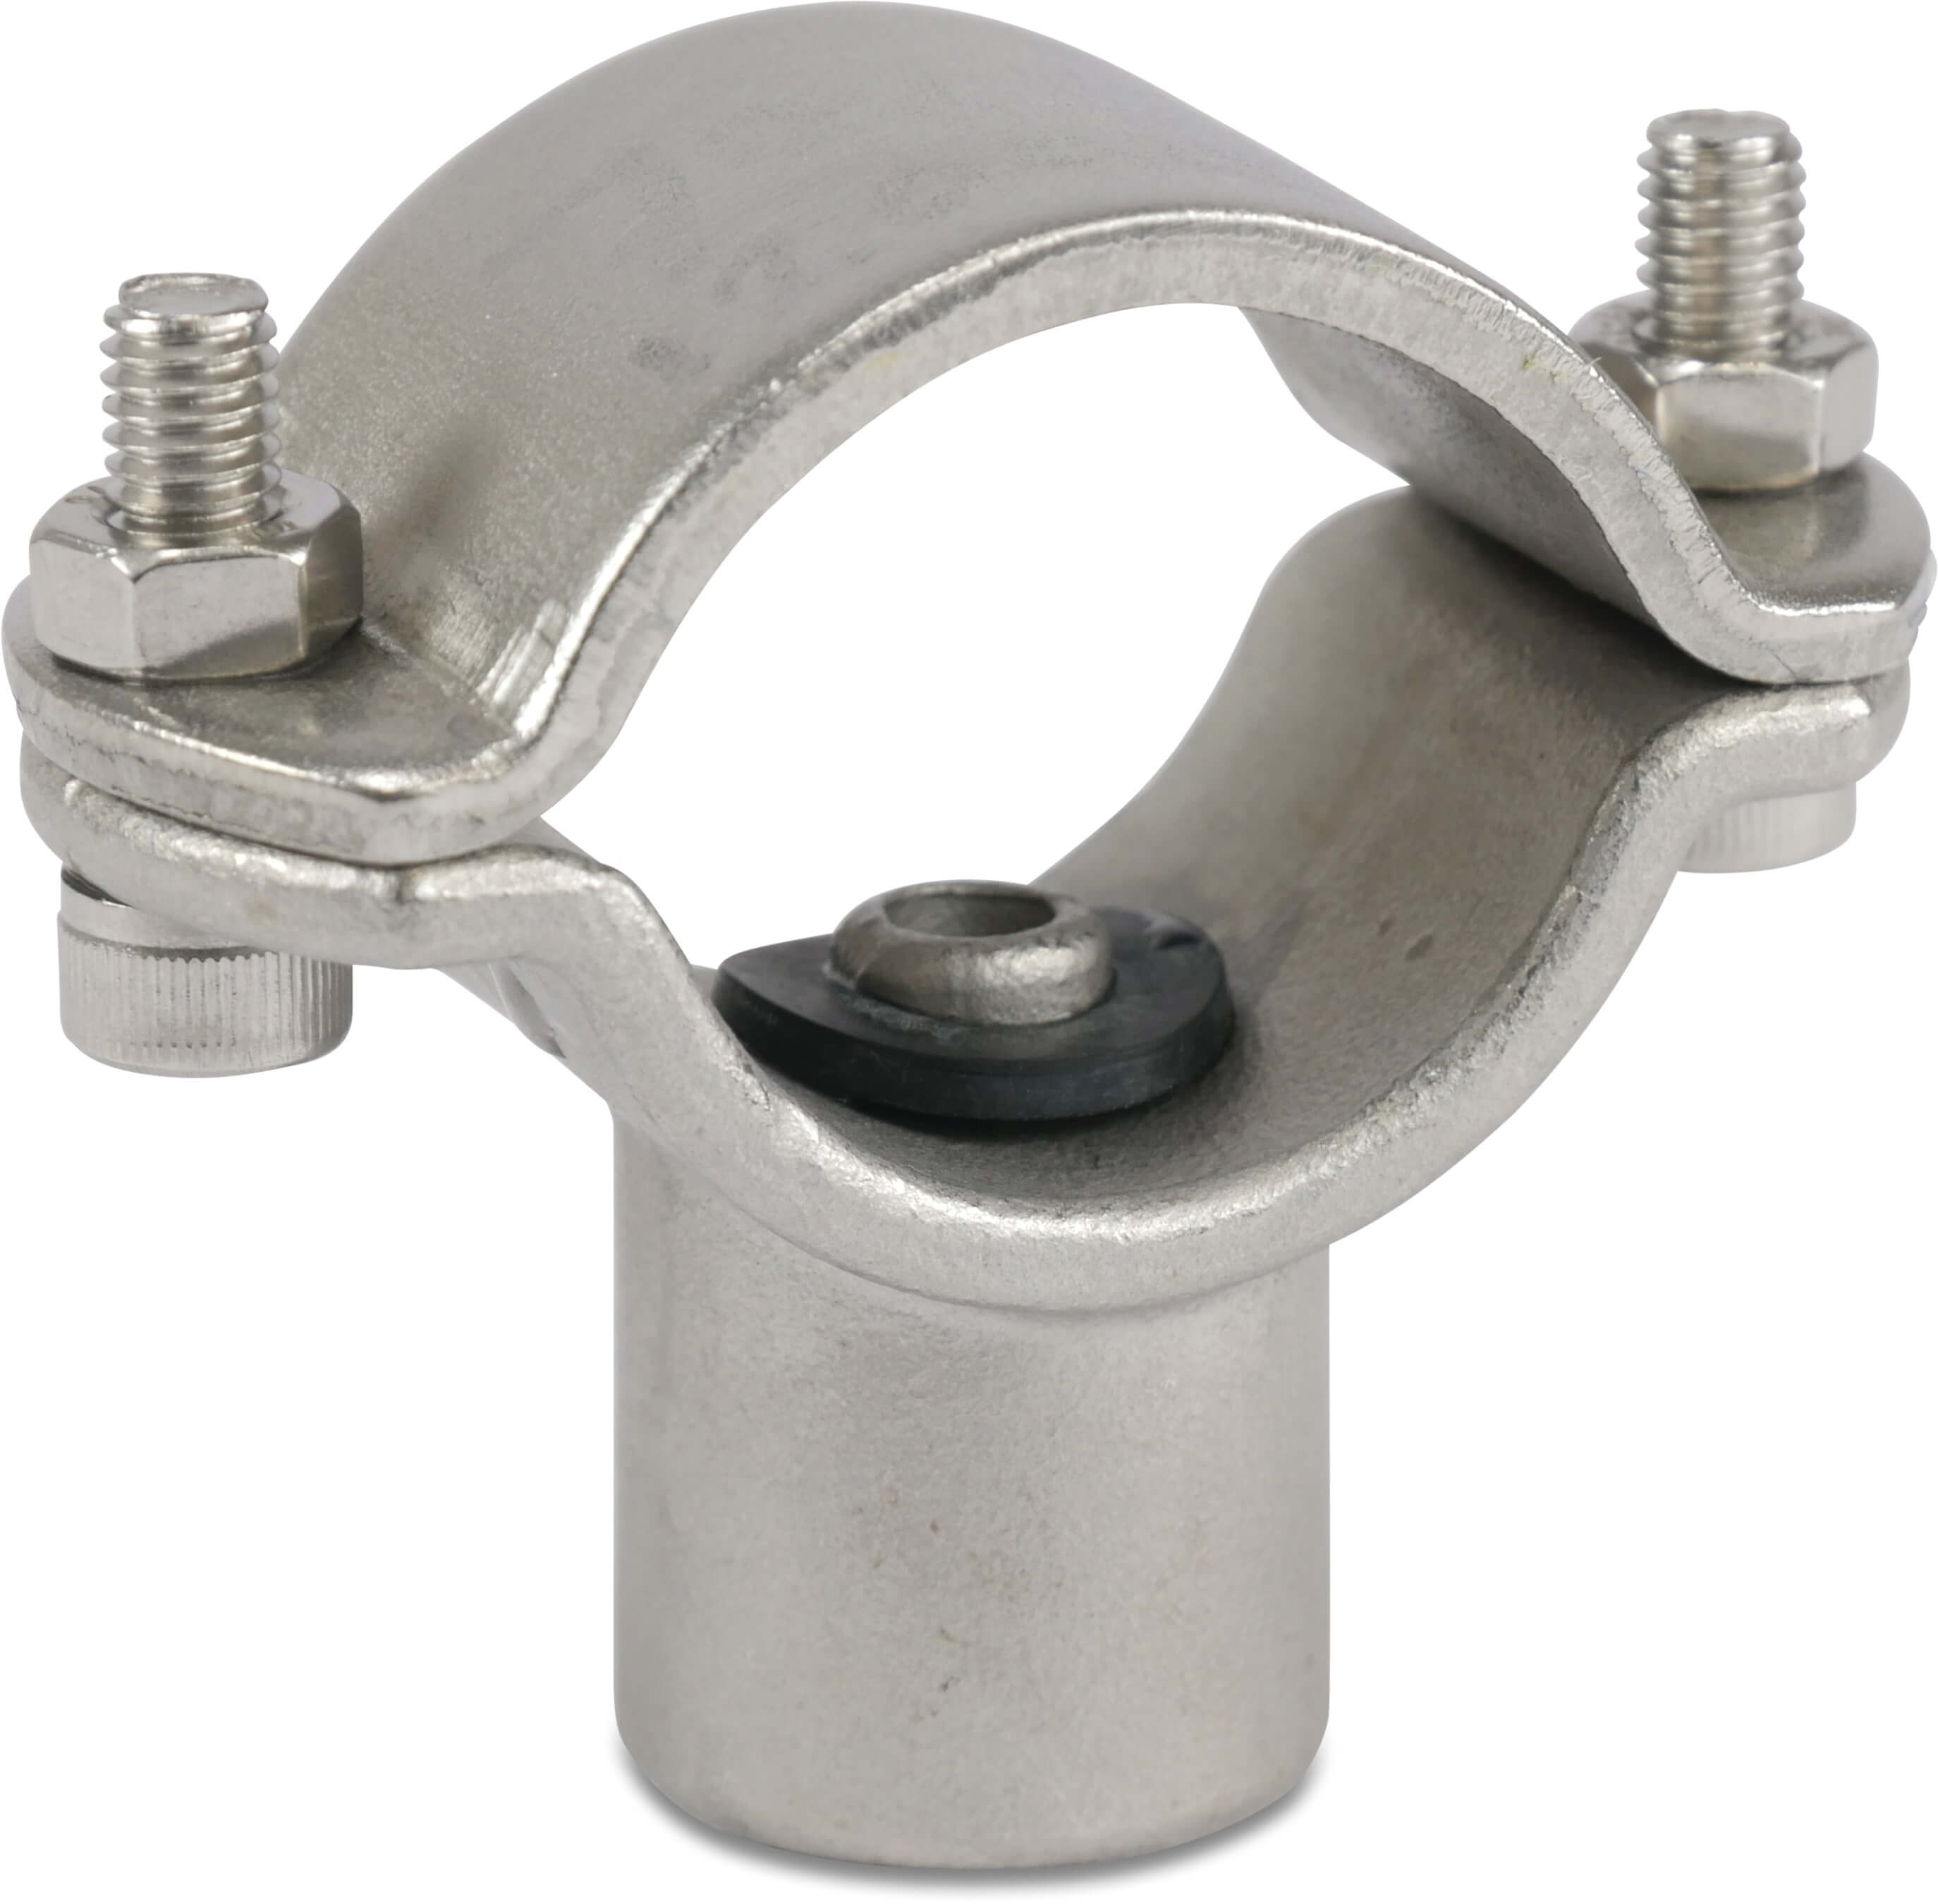 Clamp saddle stainless steel 304 1" x 1/2" clamp x female thread